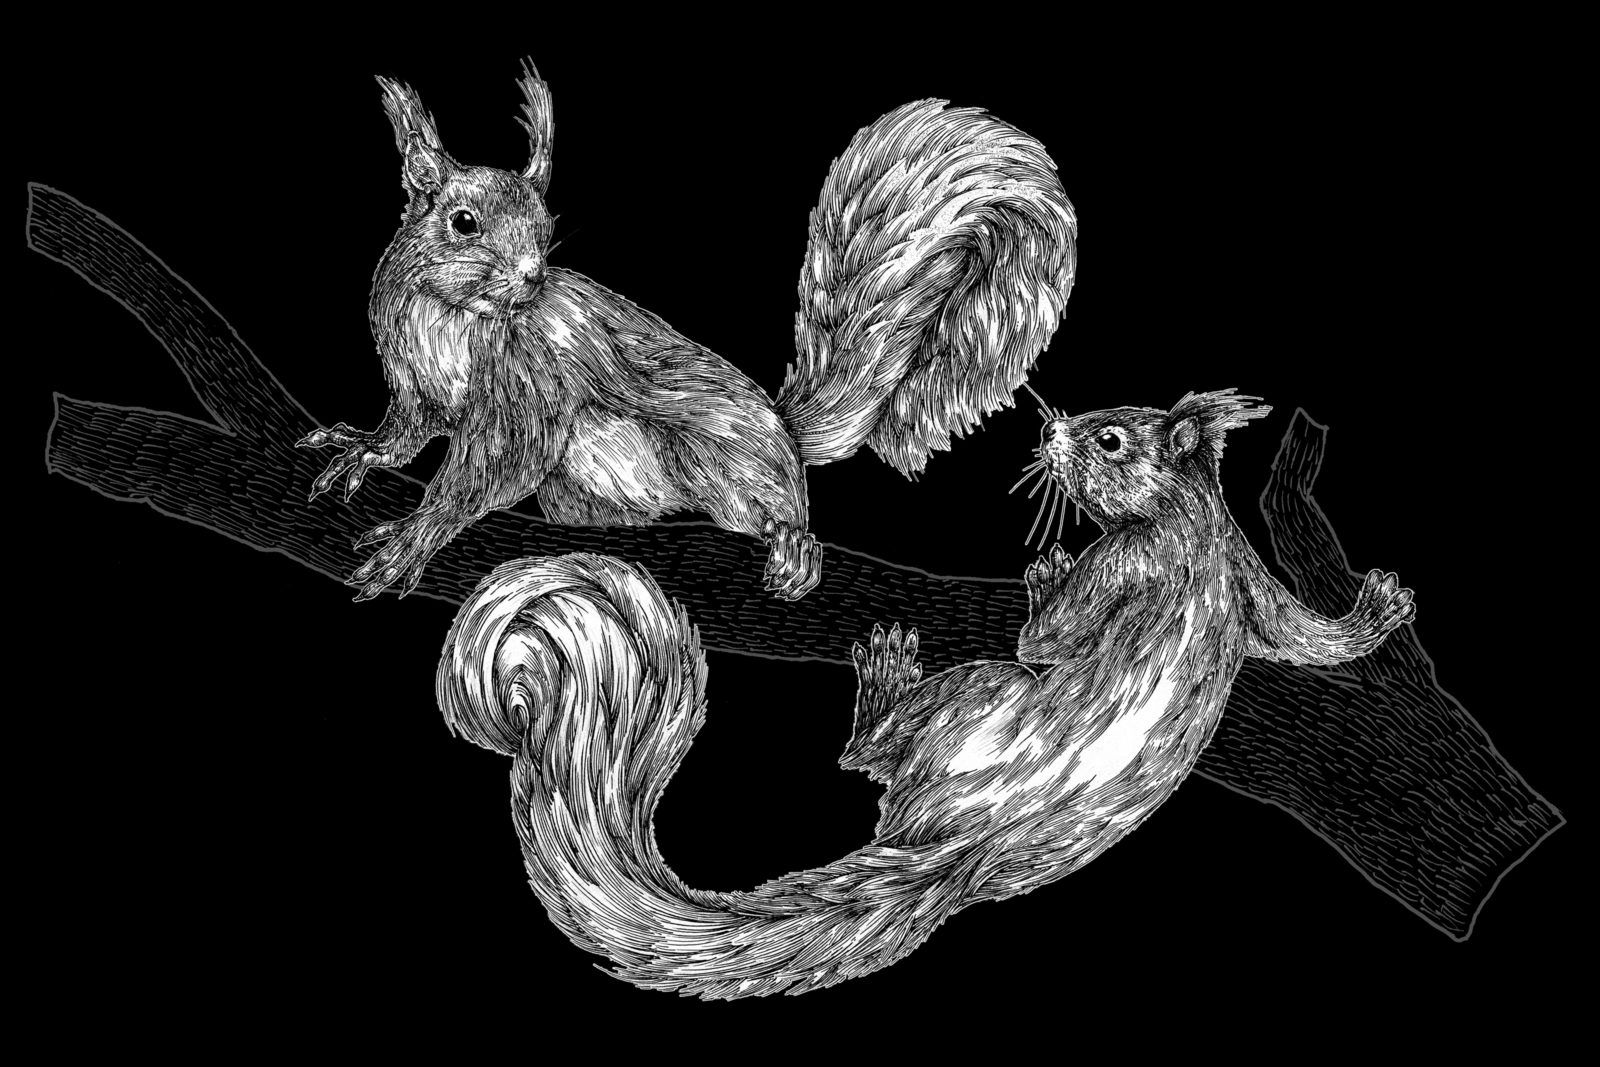 RBS banknotes Red Squirrels illustration by Timorous Beasties